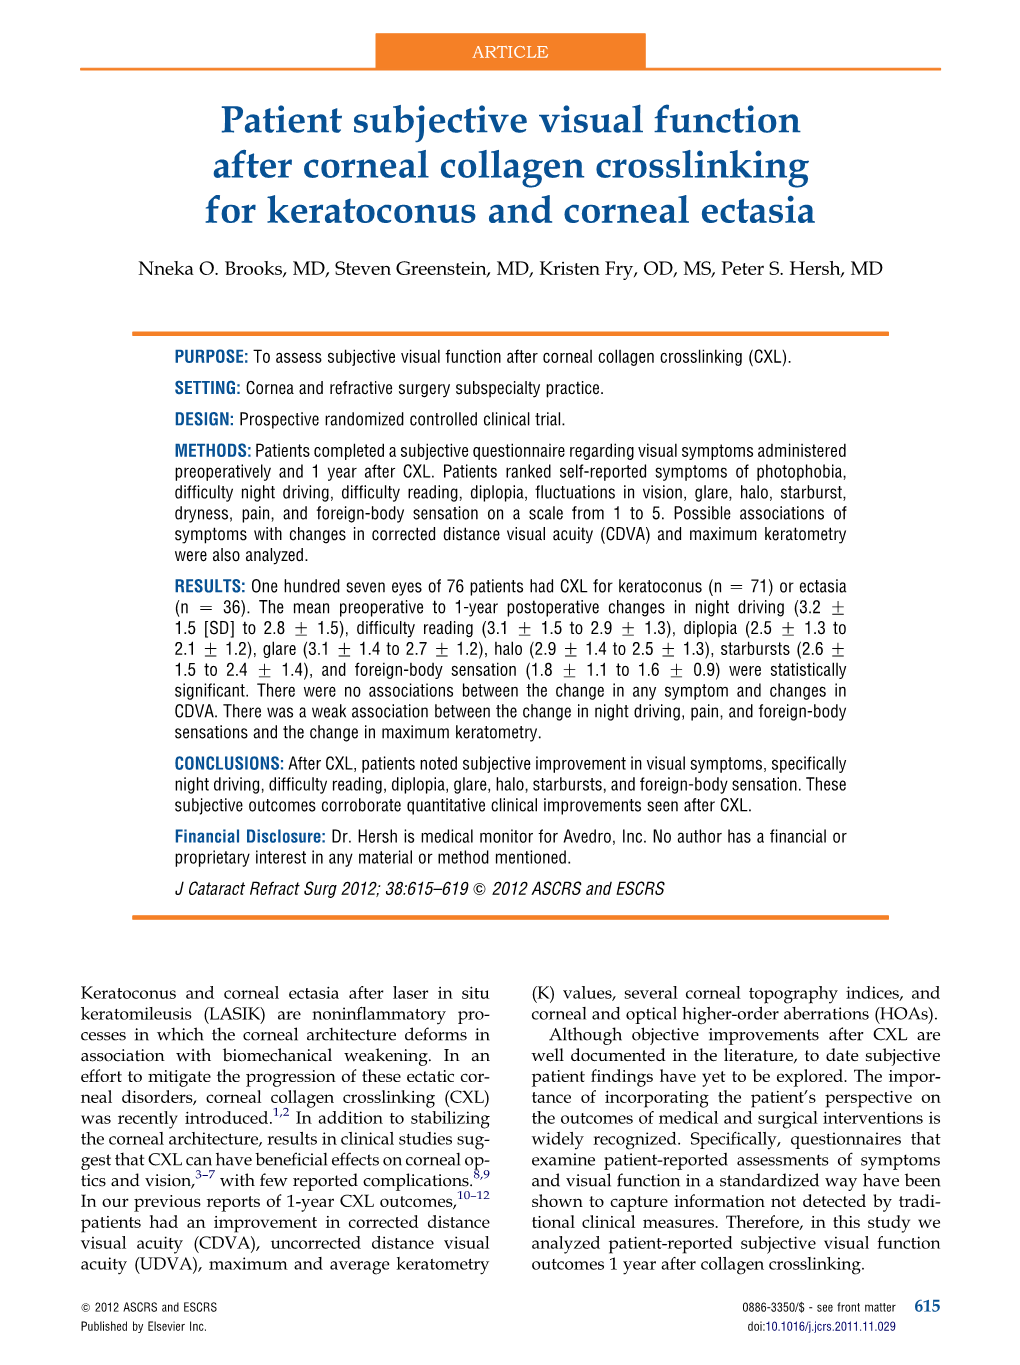 Patient Subjective Visual Function After Corneal Collagen Crosslinking for Keratoconus and Corneal Ectasia